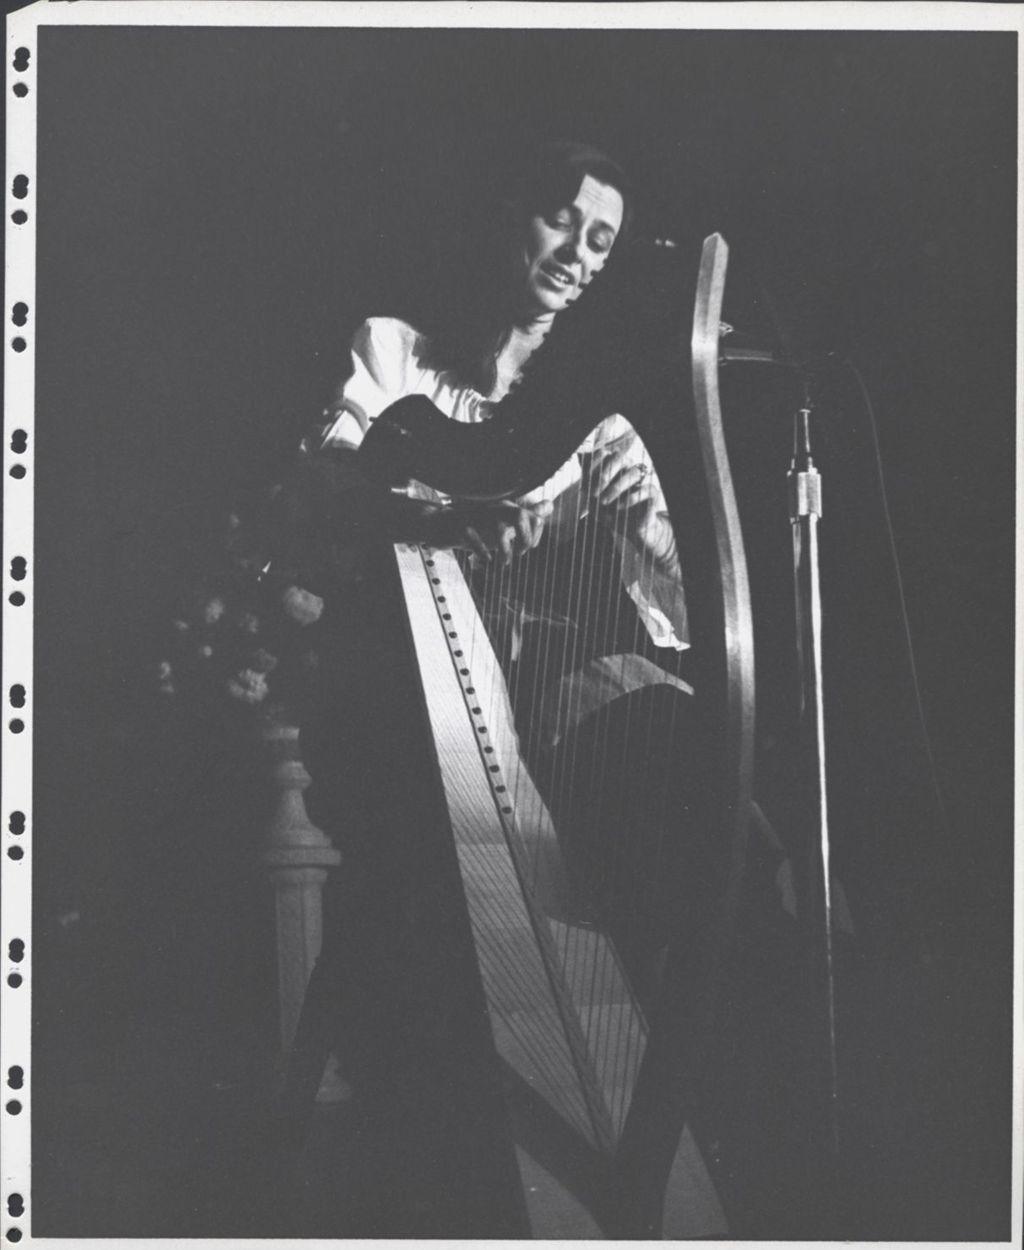 Harpist playing behind a microphone